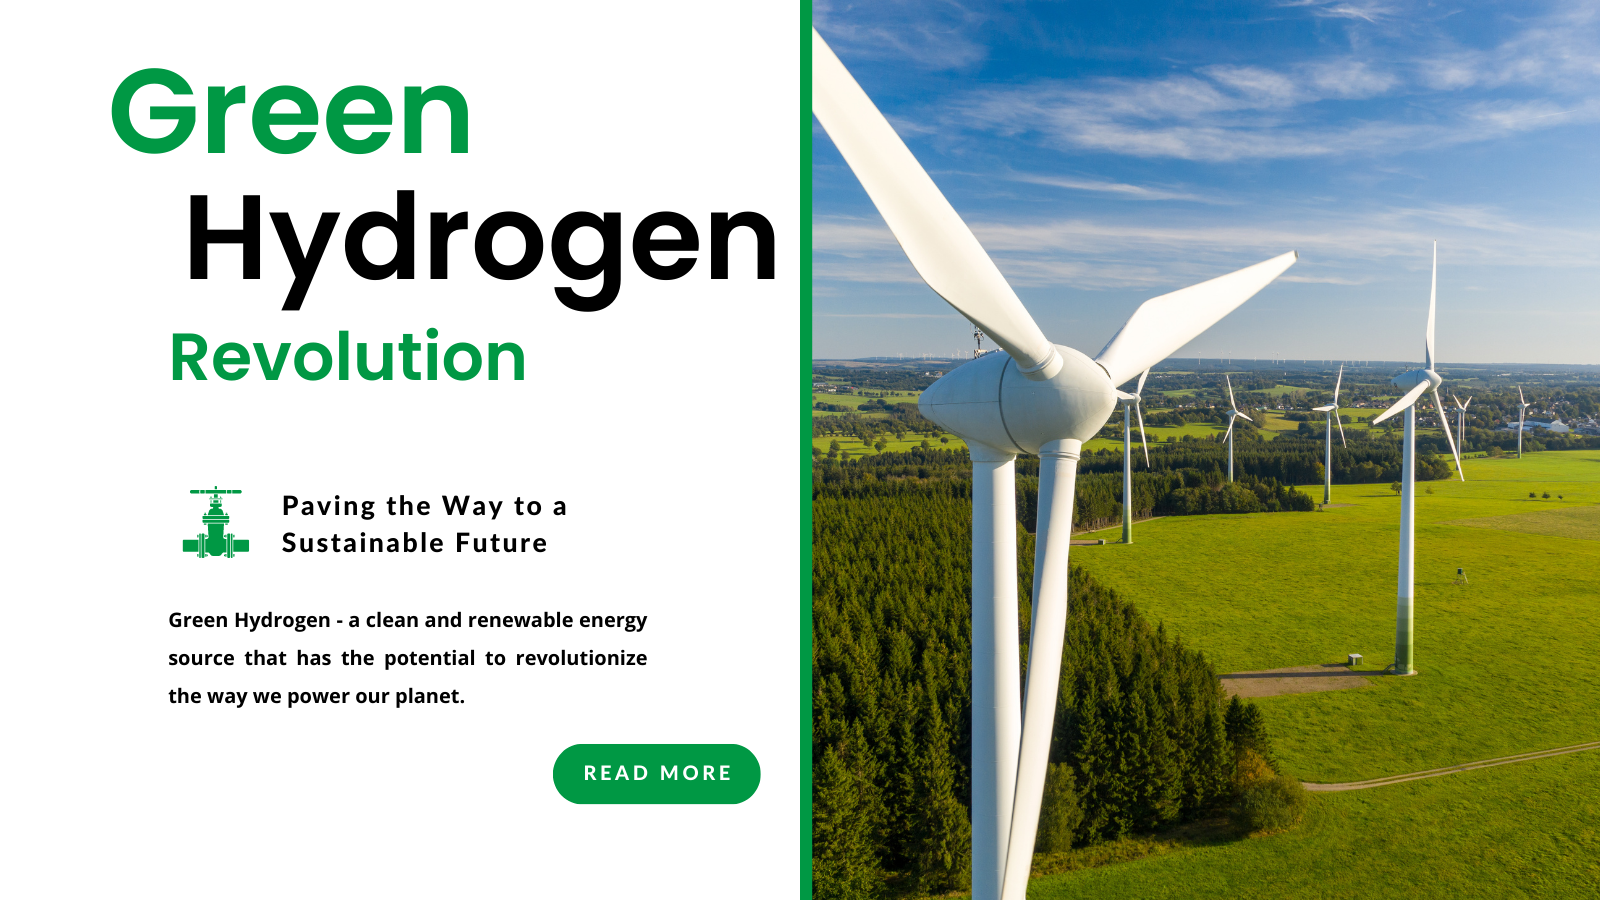 Valves News | Green Hydrogen Revolution: Paving the Way to a Sustainable Future